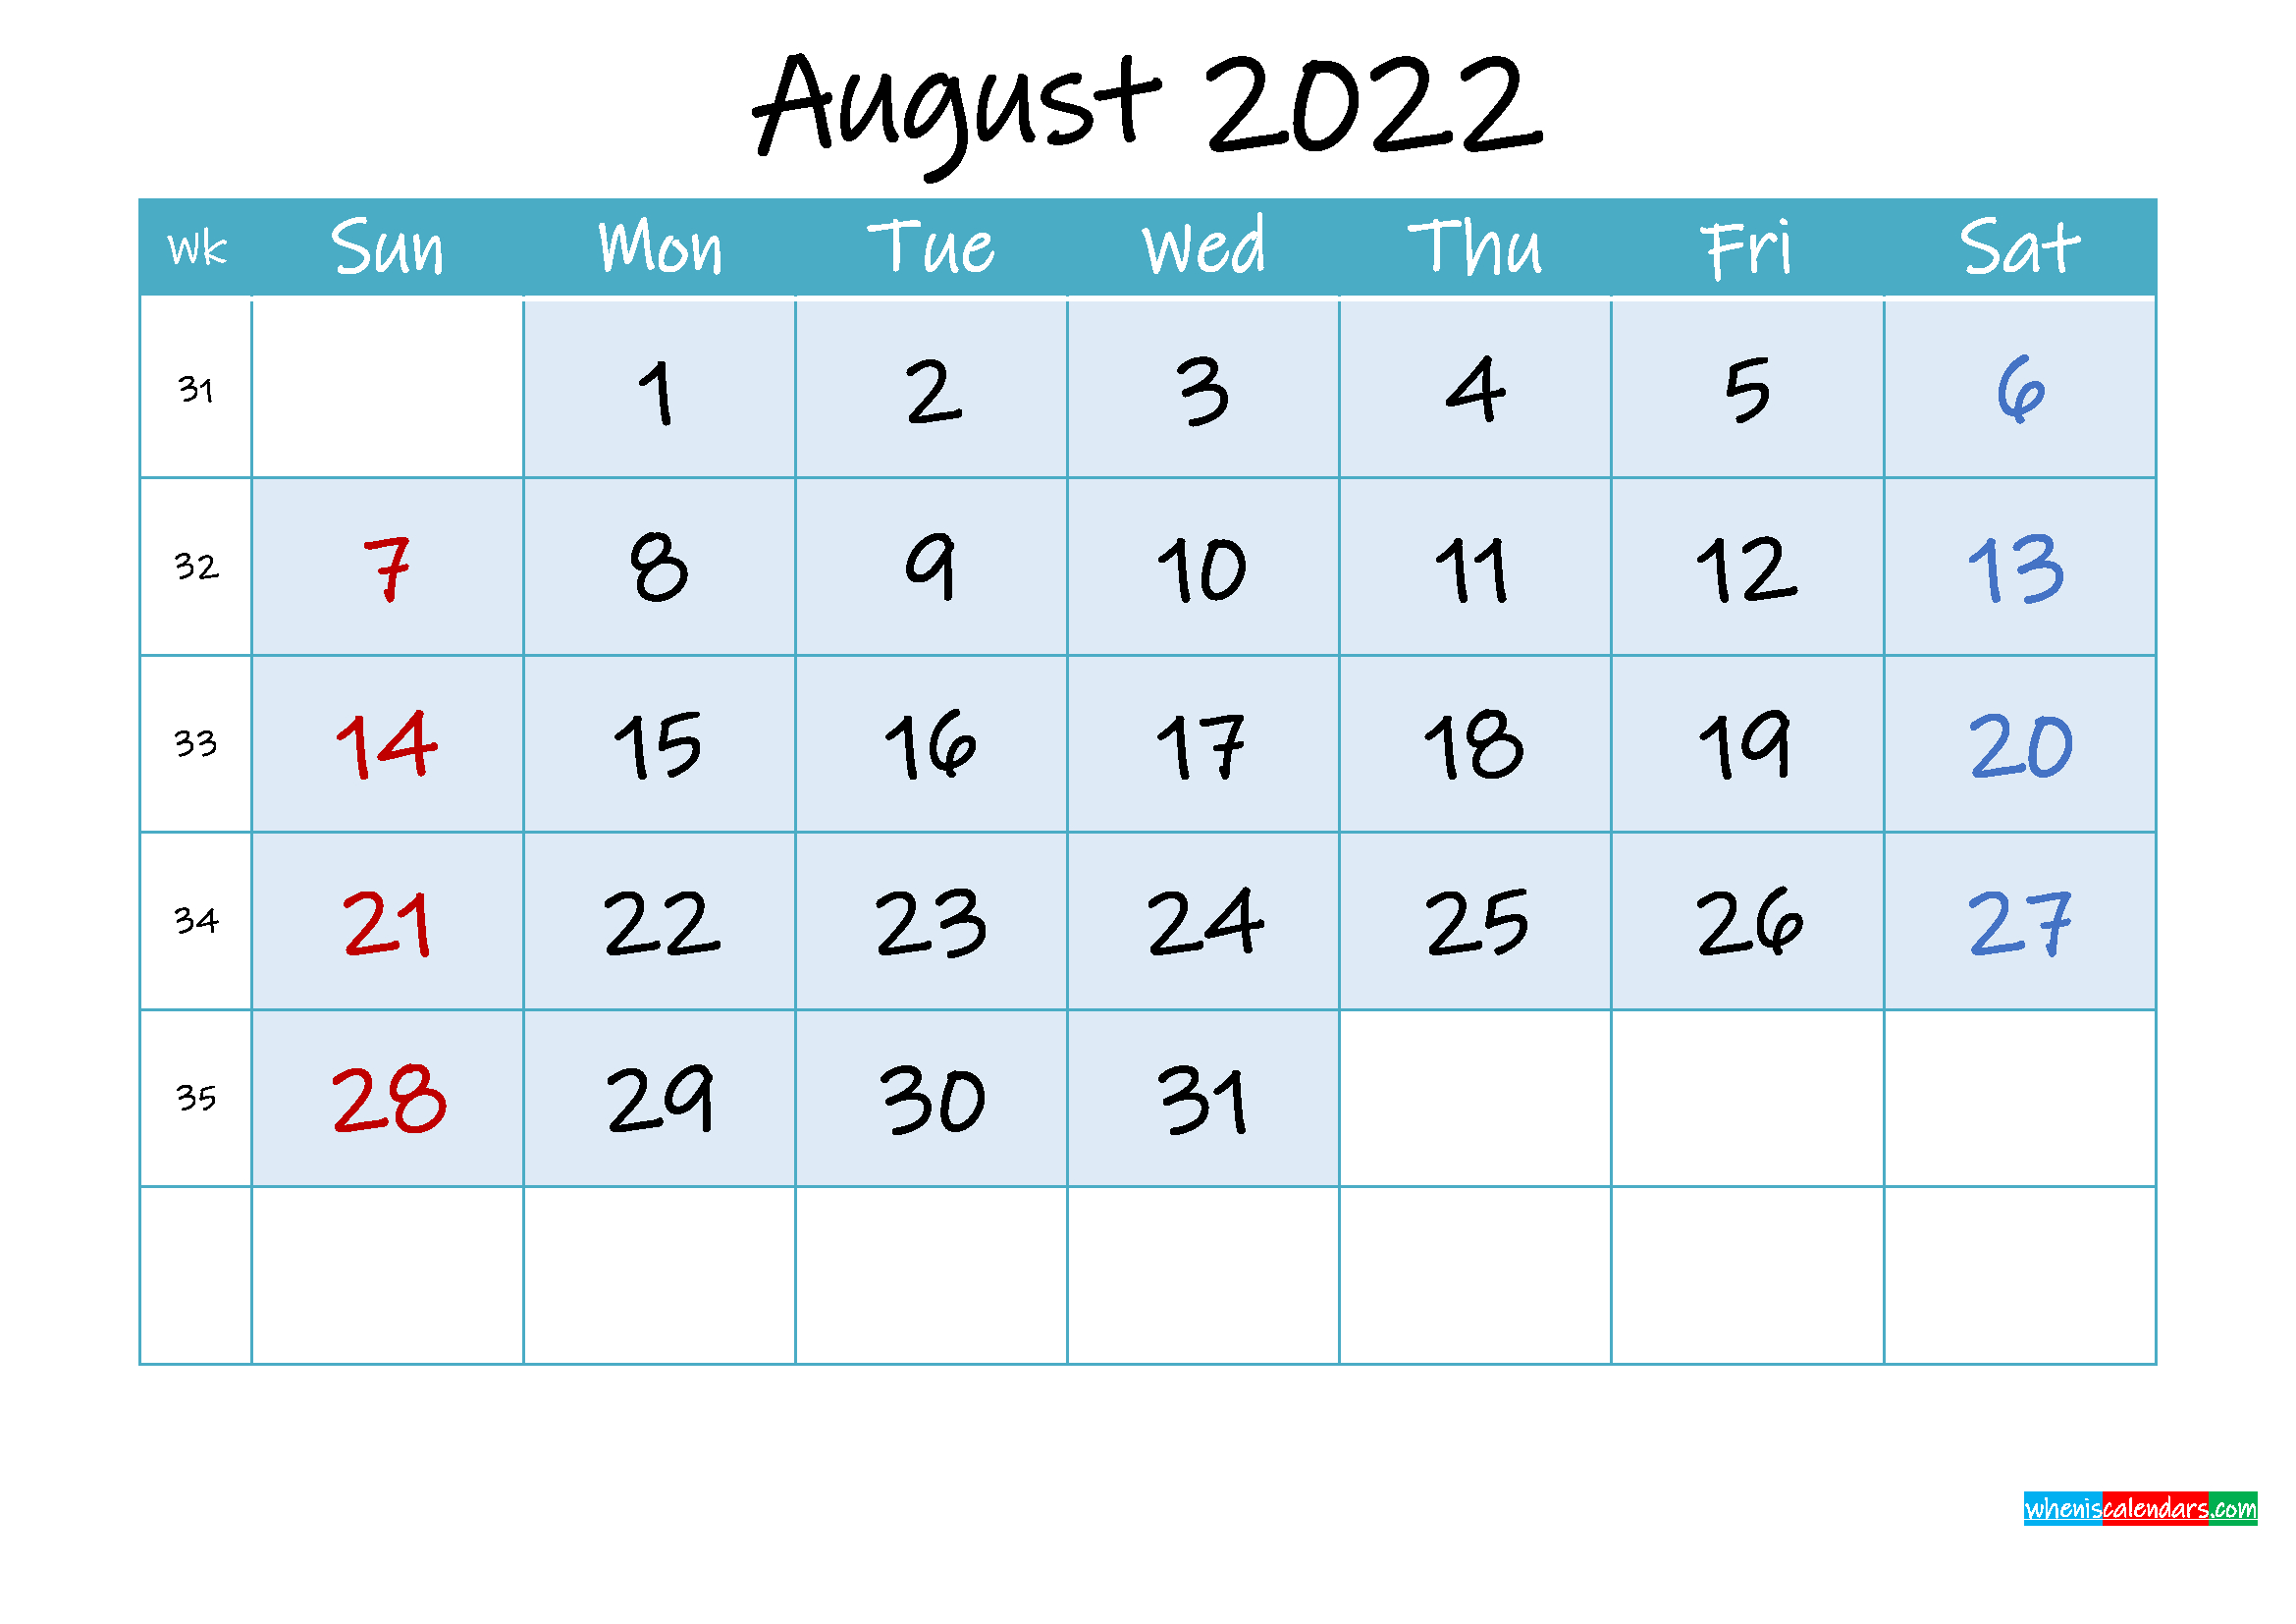 August 2022 Free Printable Calendar With Holidays  Template Ink22M152 with regard to August 2022 Printable Calendar